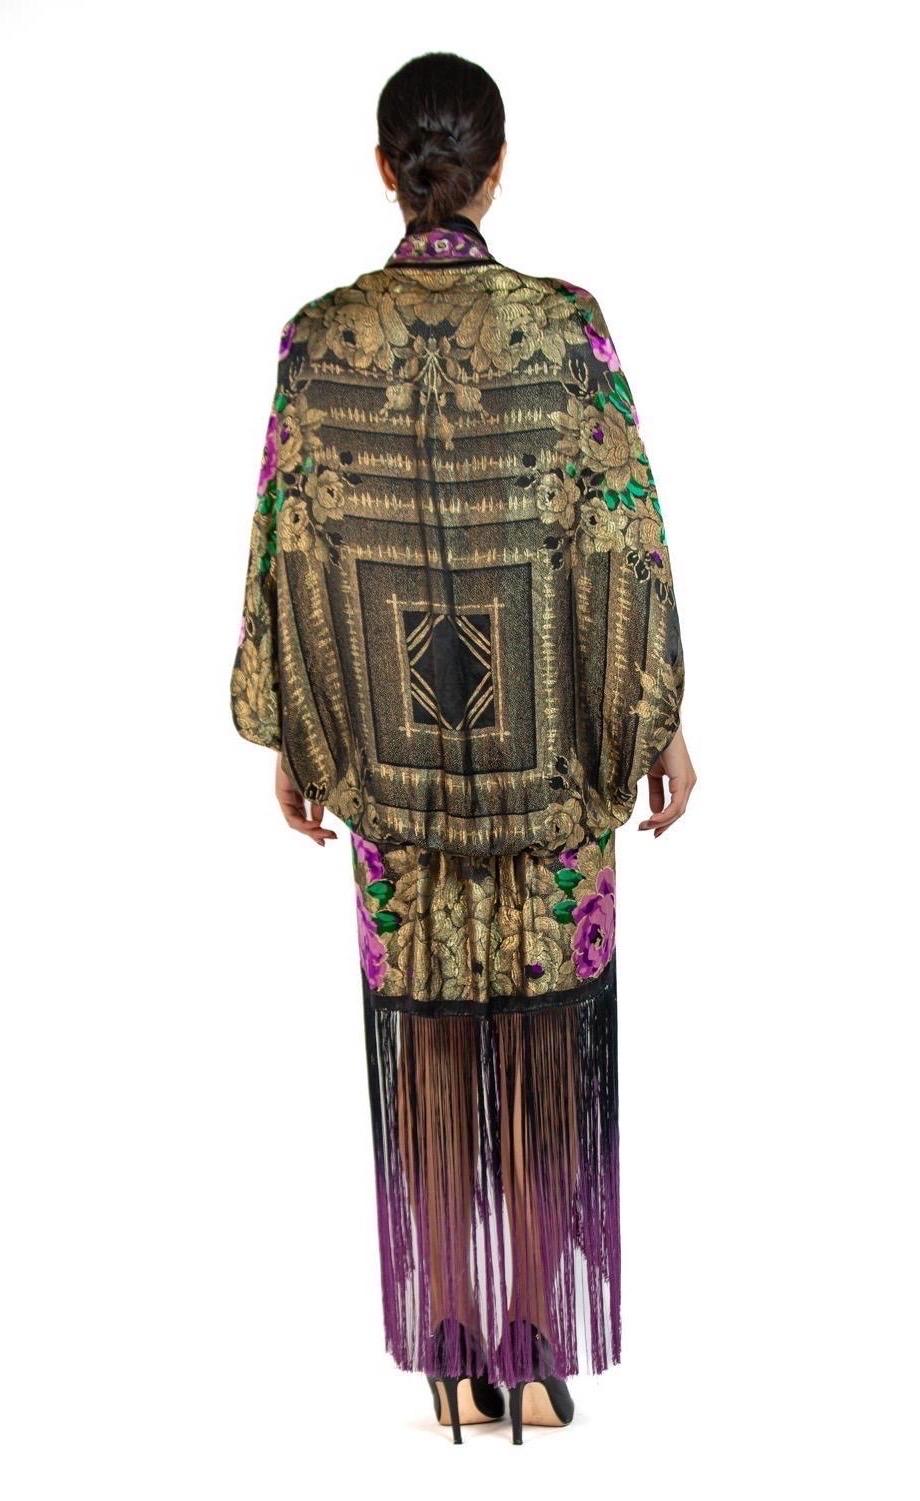 MORPHEW COLLECTION Black, Gold & Purple Metallic Silk Lamé Cocoon With Fringe A 2